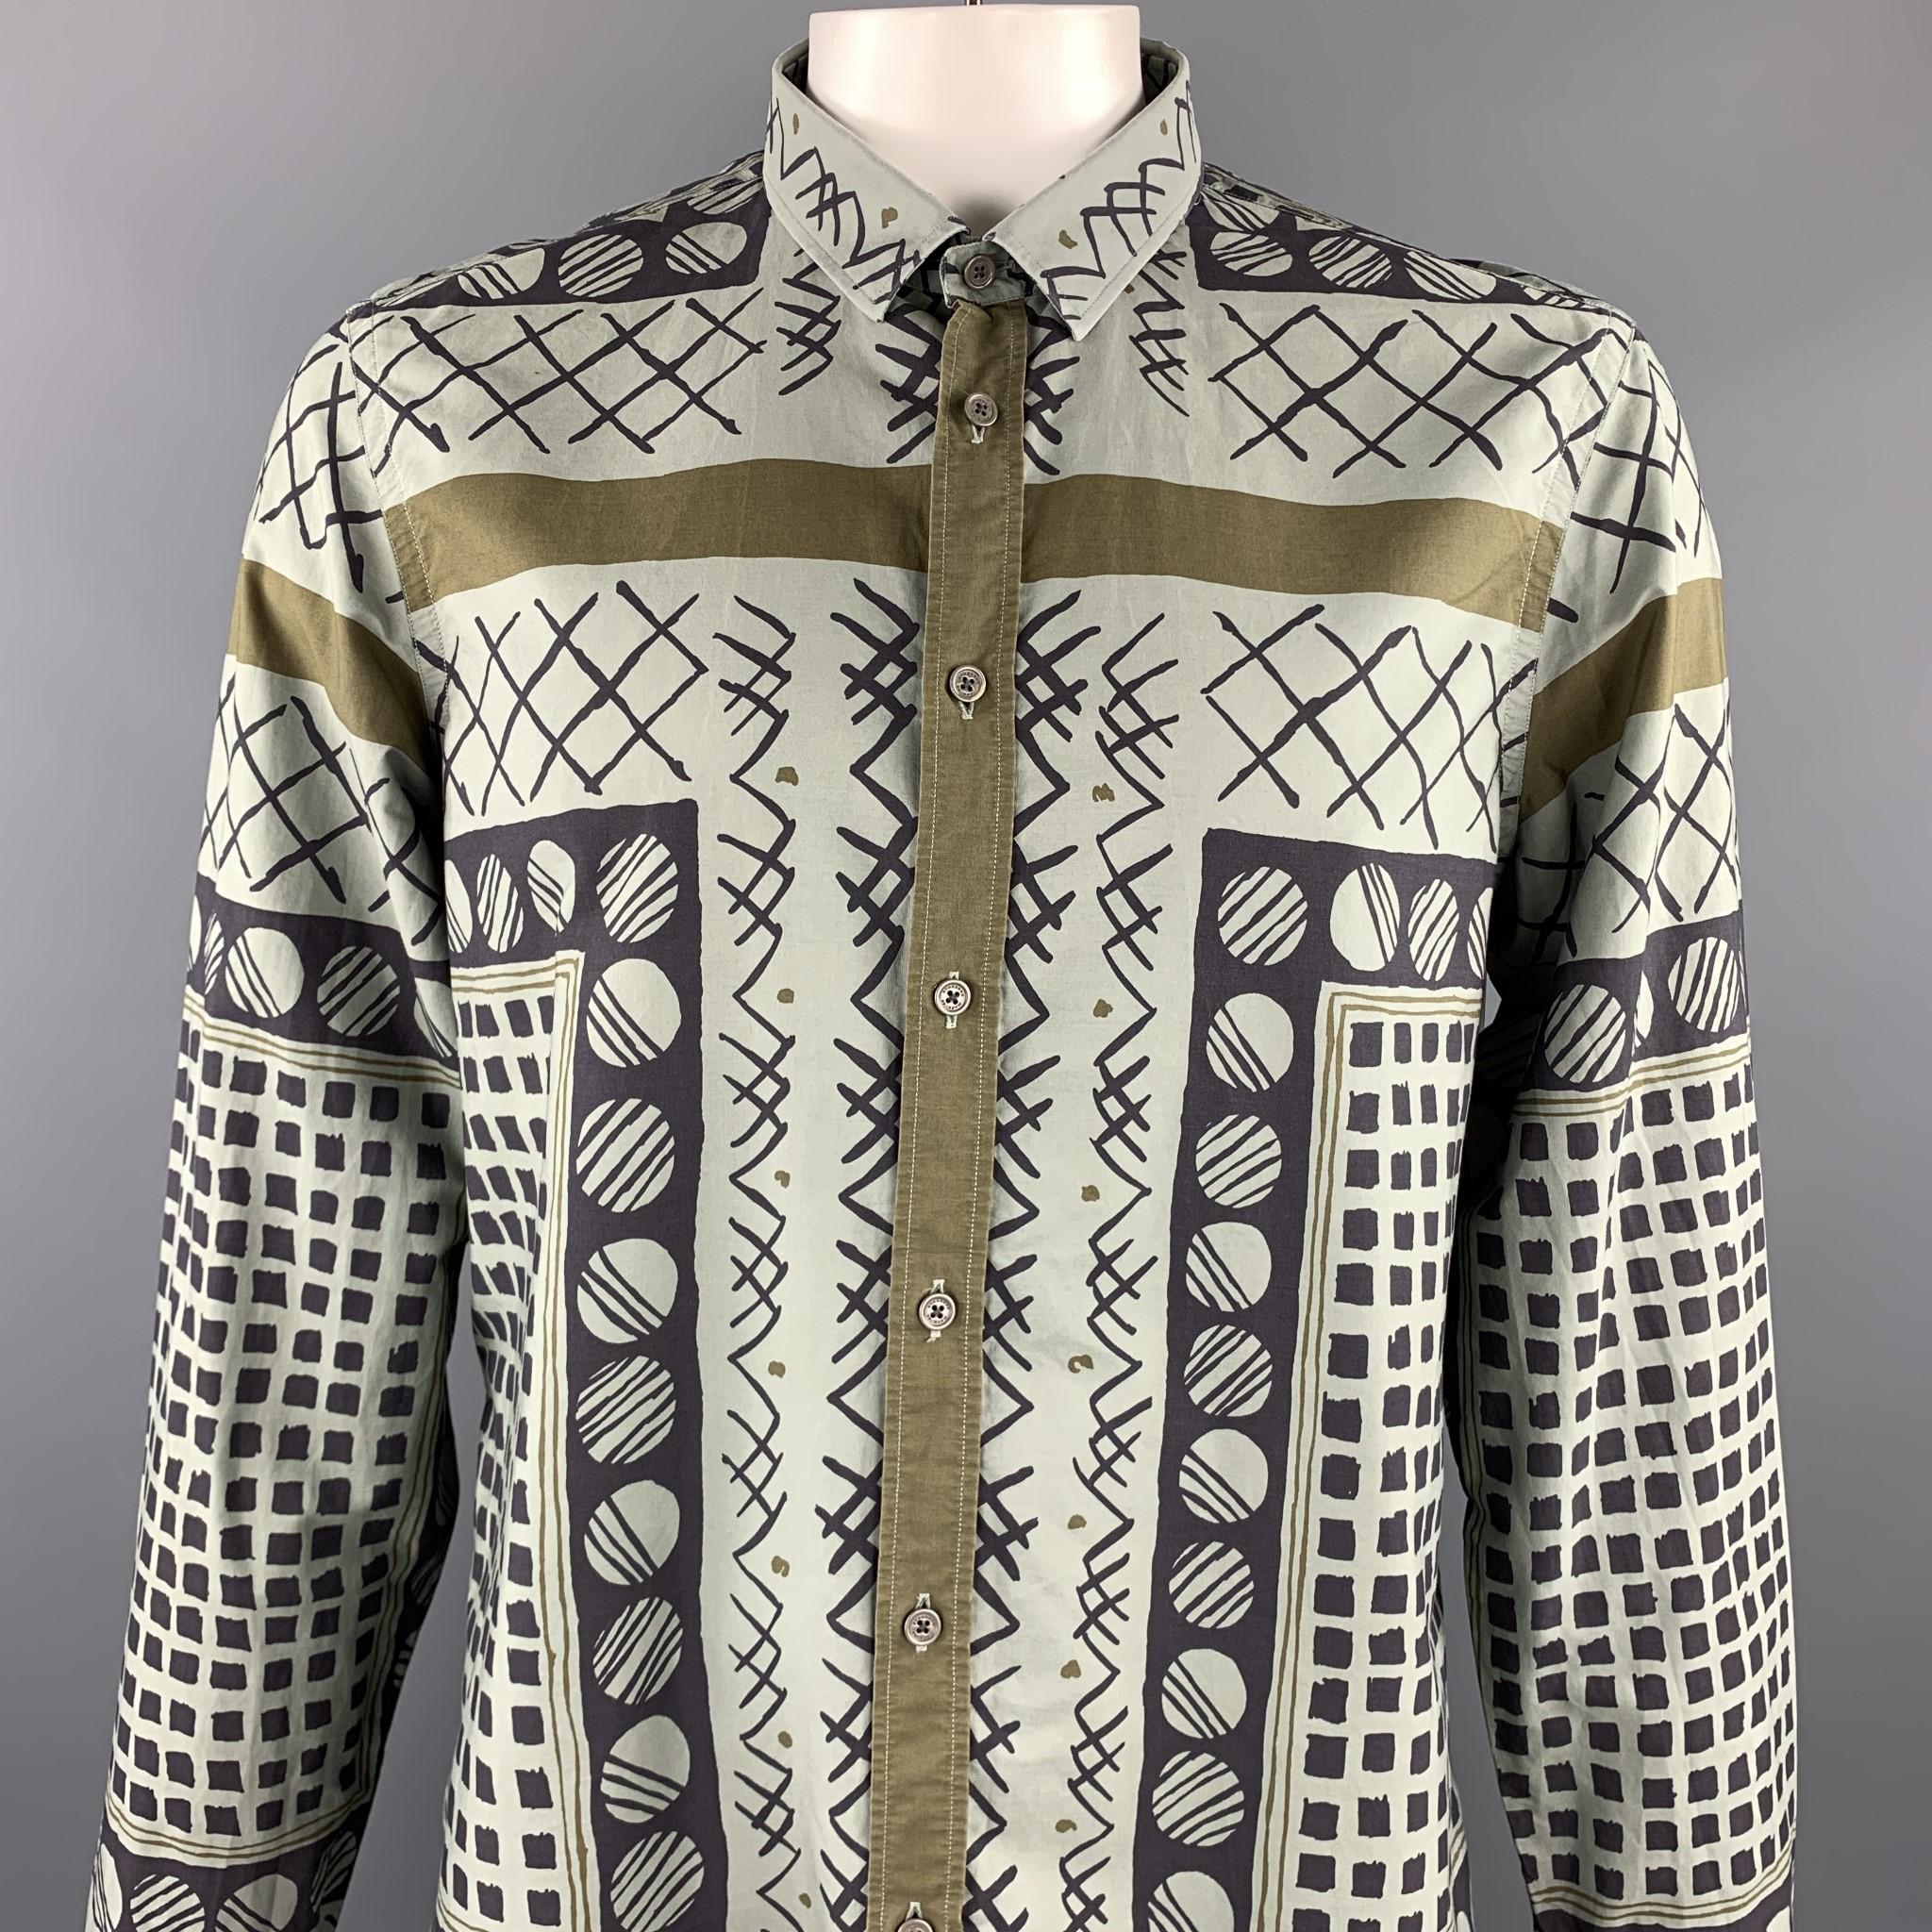 BURBERRY PRORSUM long sleeve shirt comes in a olive geometric print featuring a button up style and a spread collar. Made in Italy.

Excellent Pre-Owned Condition.
Marked: 46

Measurements:

Shoulder: 17.5 in. 
Chest: 46 in. 
Sleeve: 28.5 in.